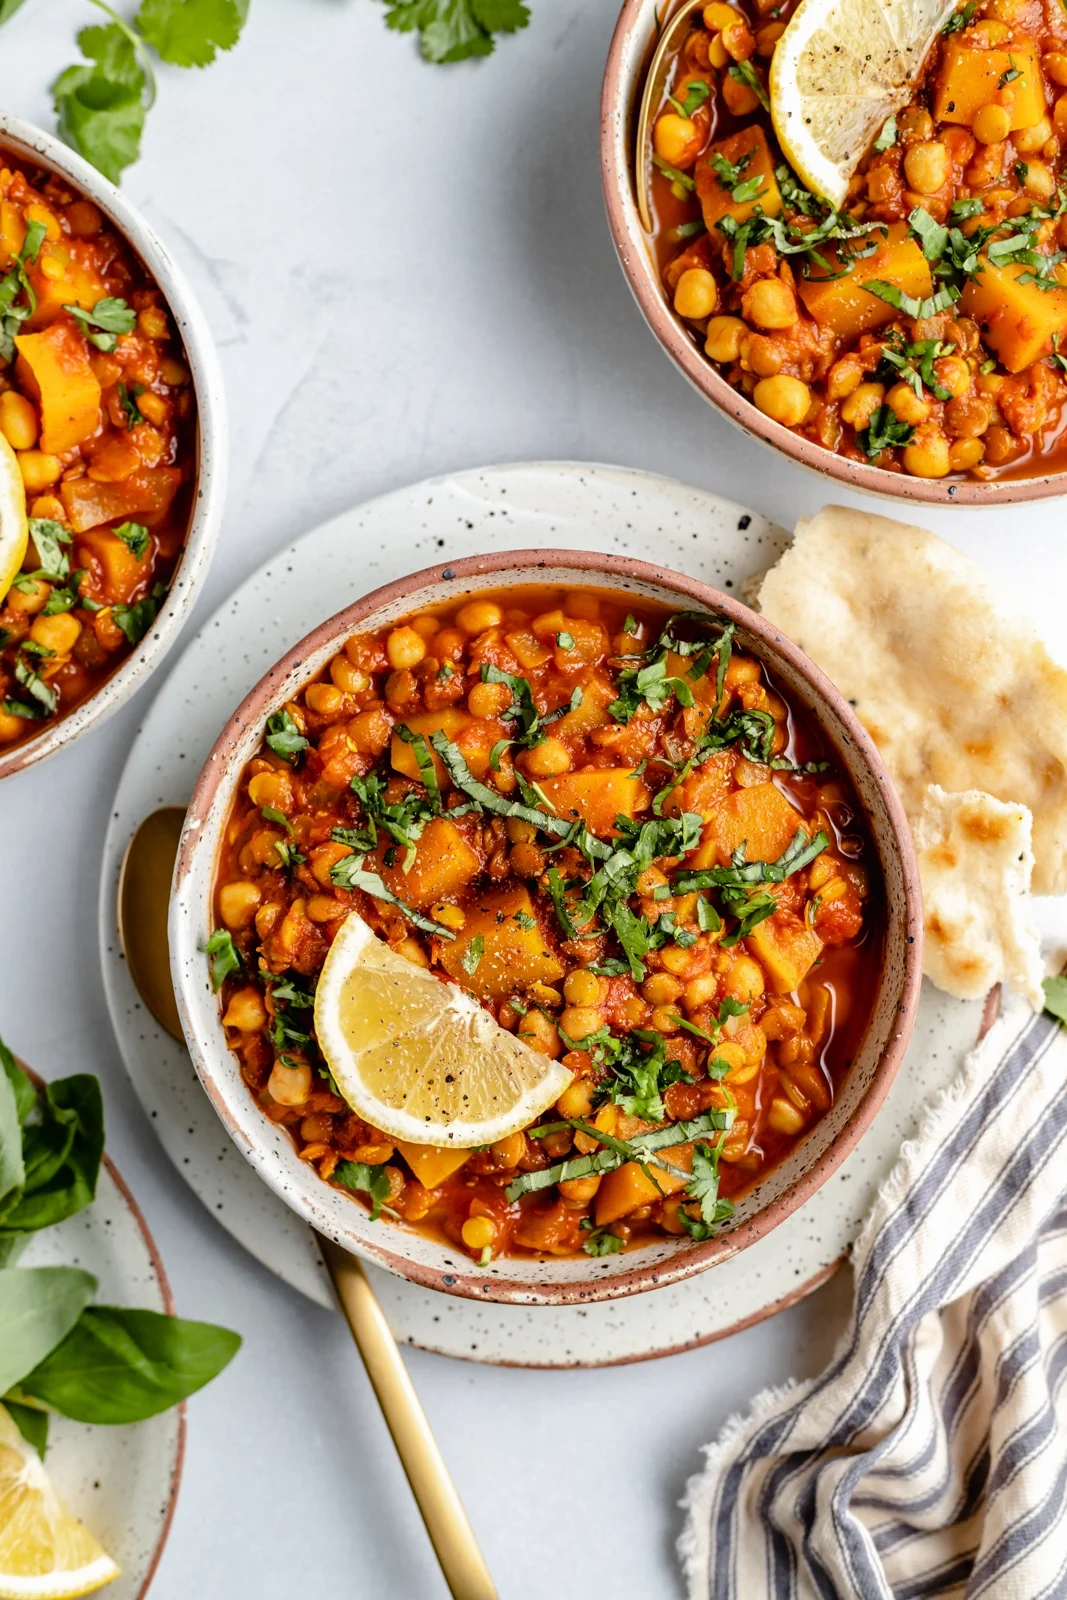 Butternut Squash, Chickpea and Lentil Moroccan-Spiced Stew